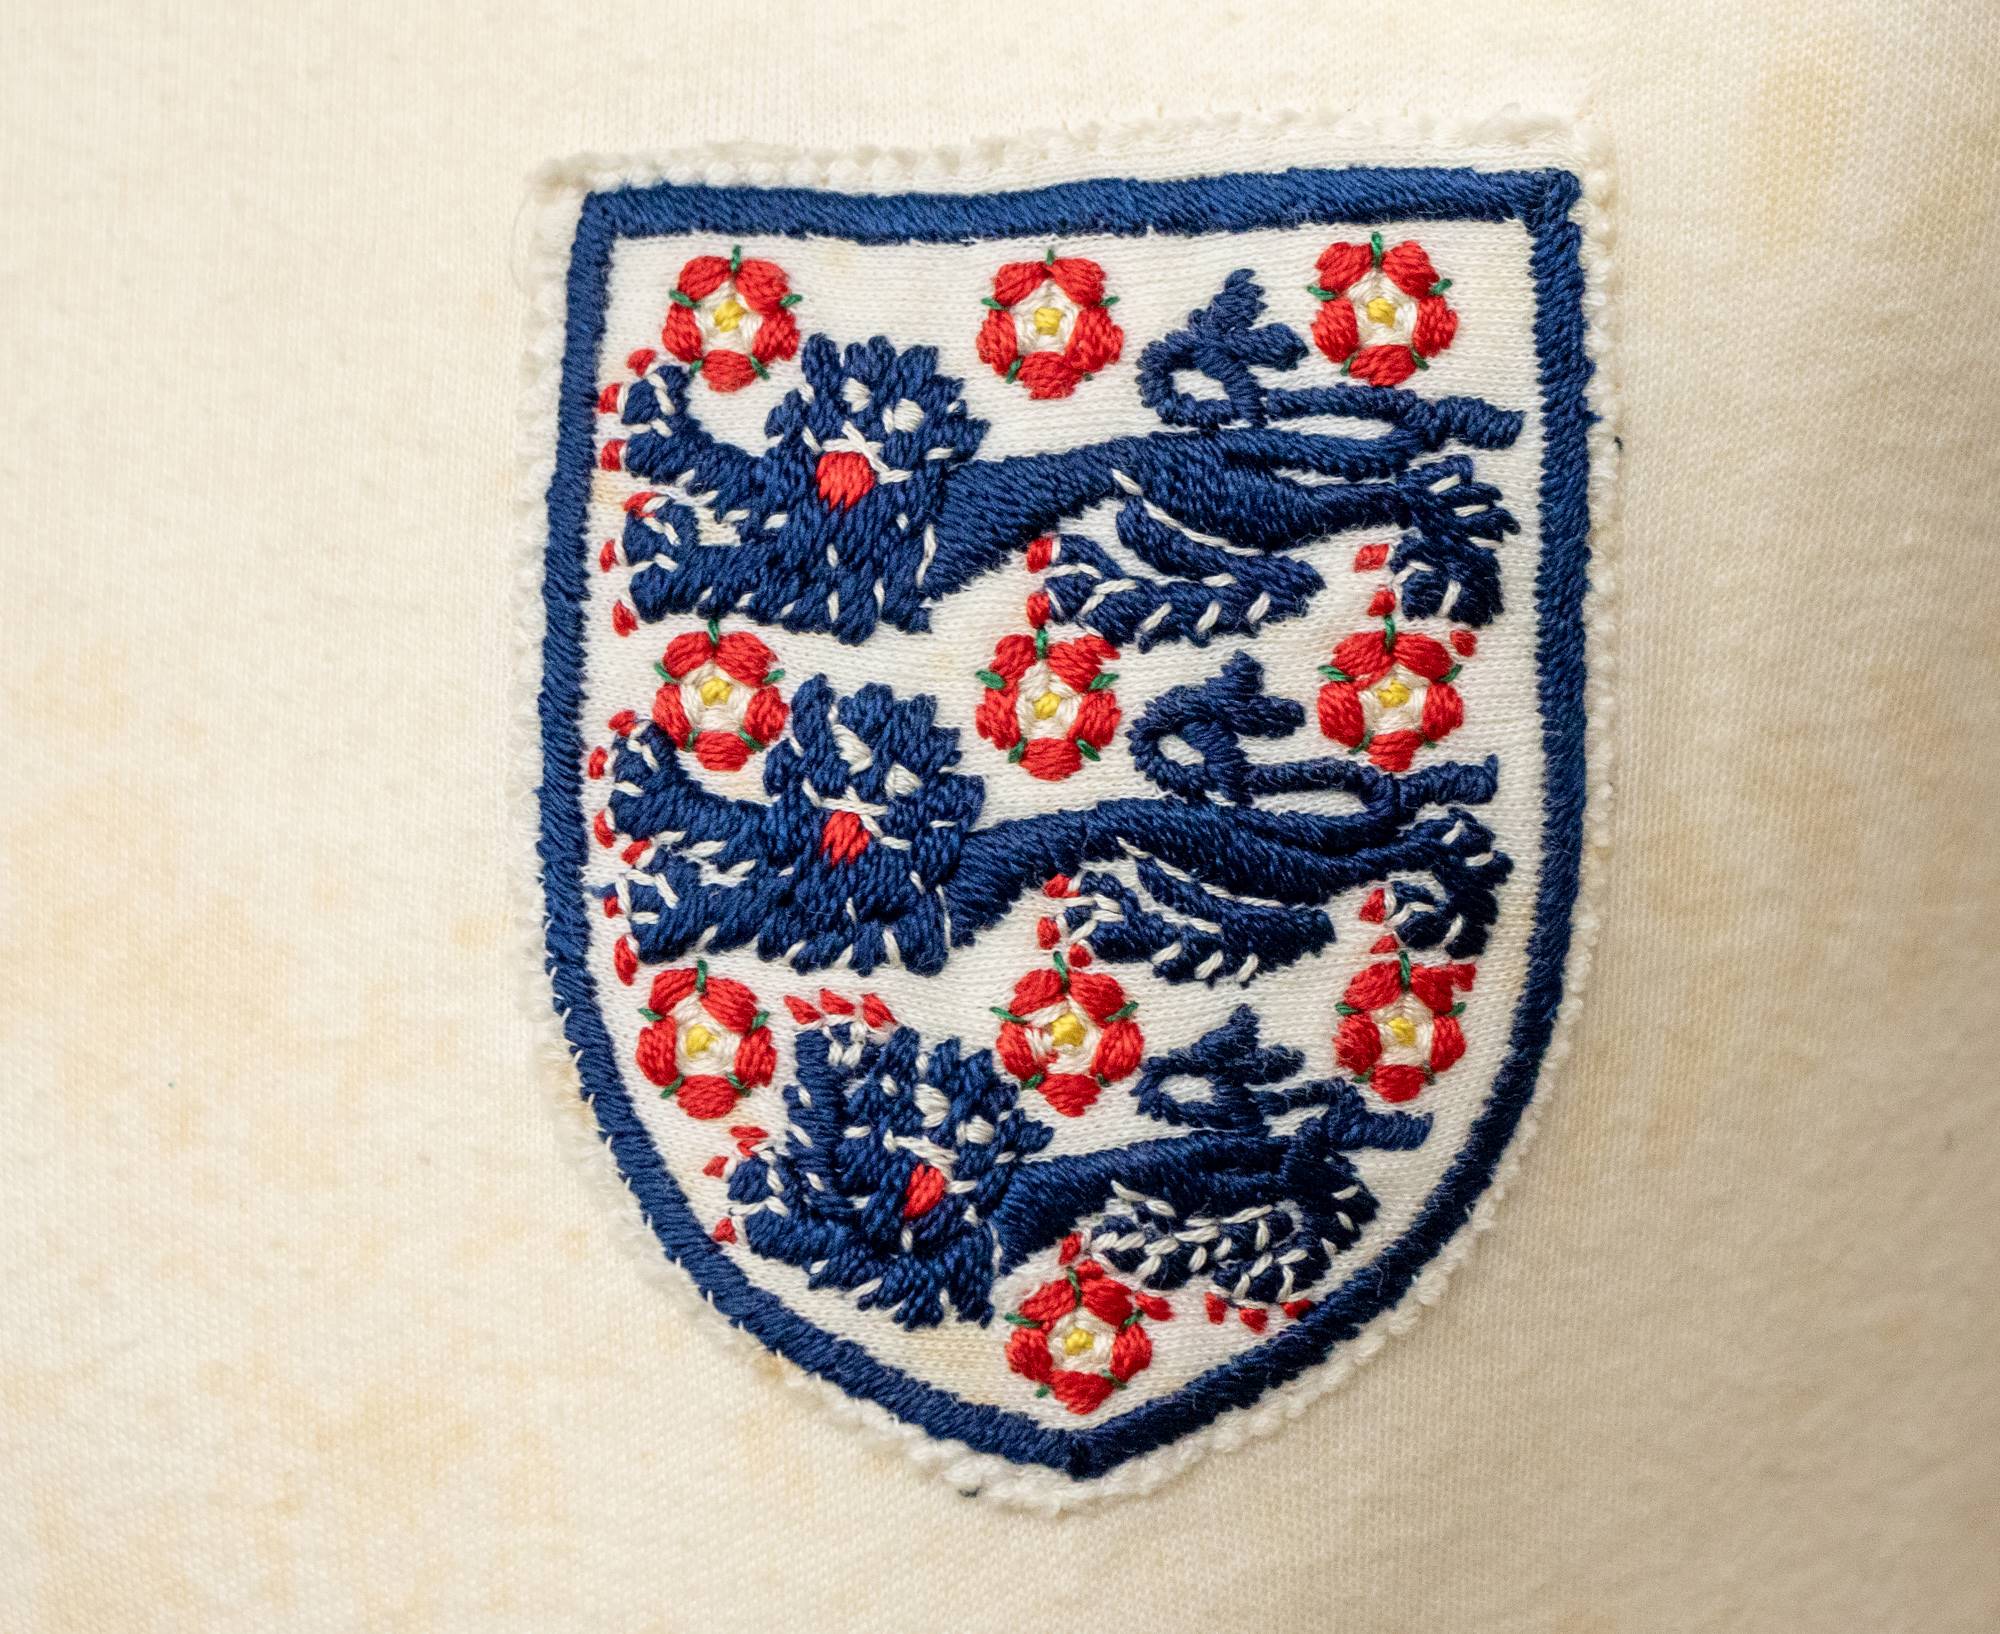 Badge on Shirt worn by Sir Bobby Charlton in the 1966 World Cup semi-final against Portugal